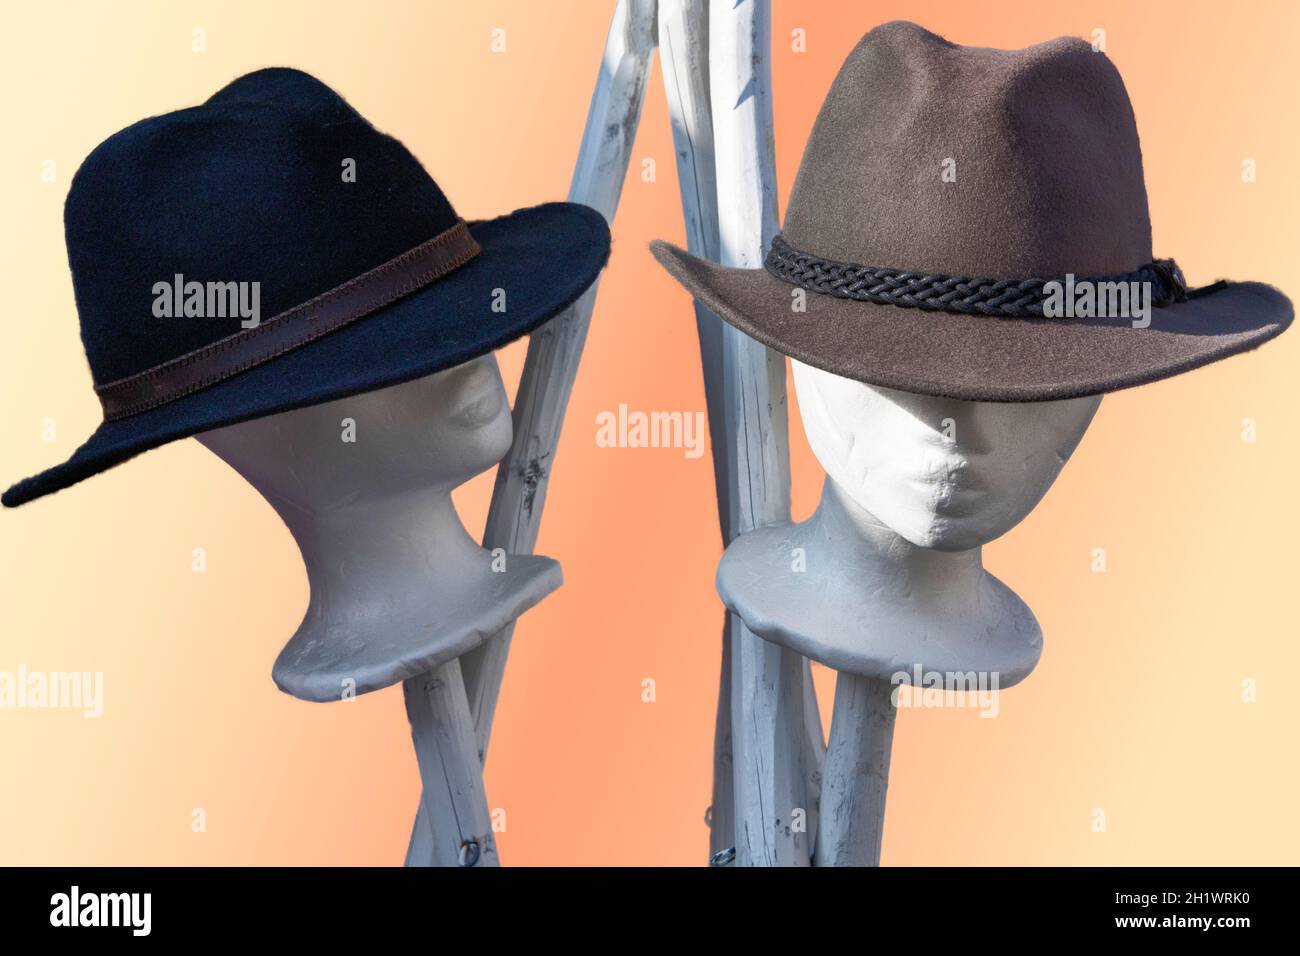 Human like dolly heads with hats against a light colored background Stock Photo